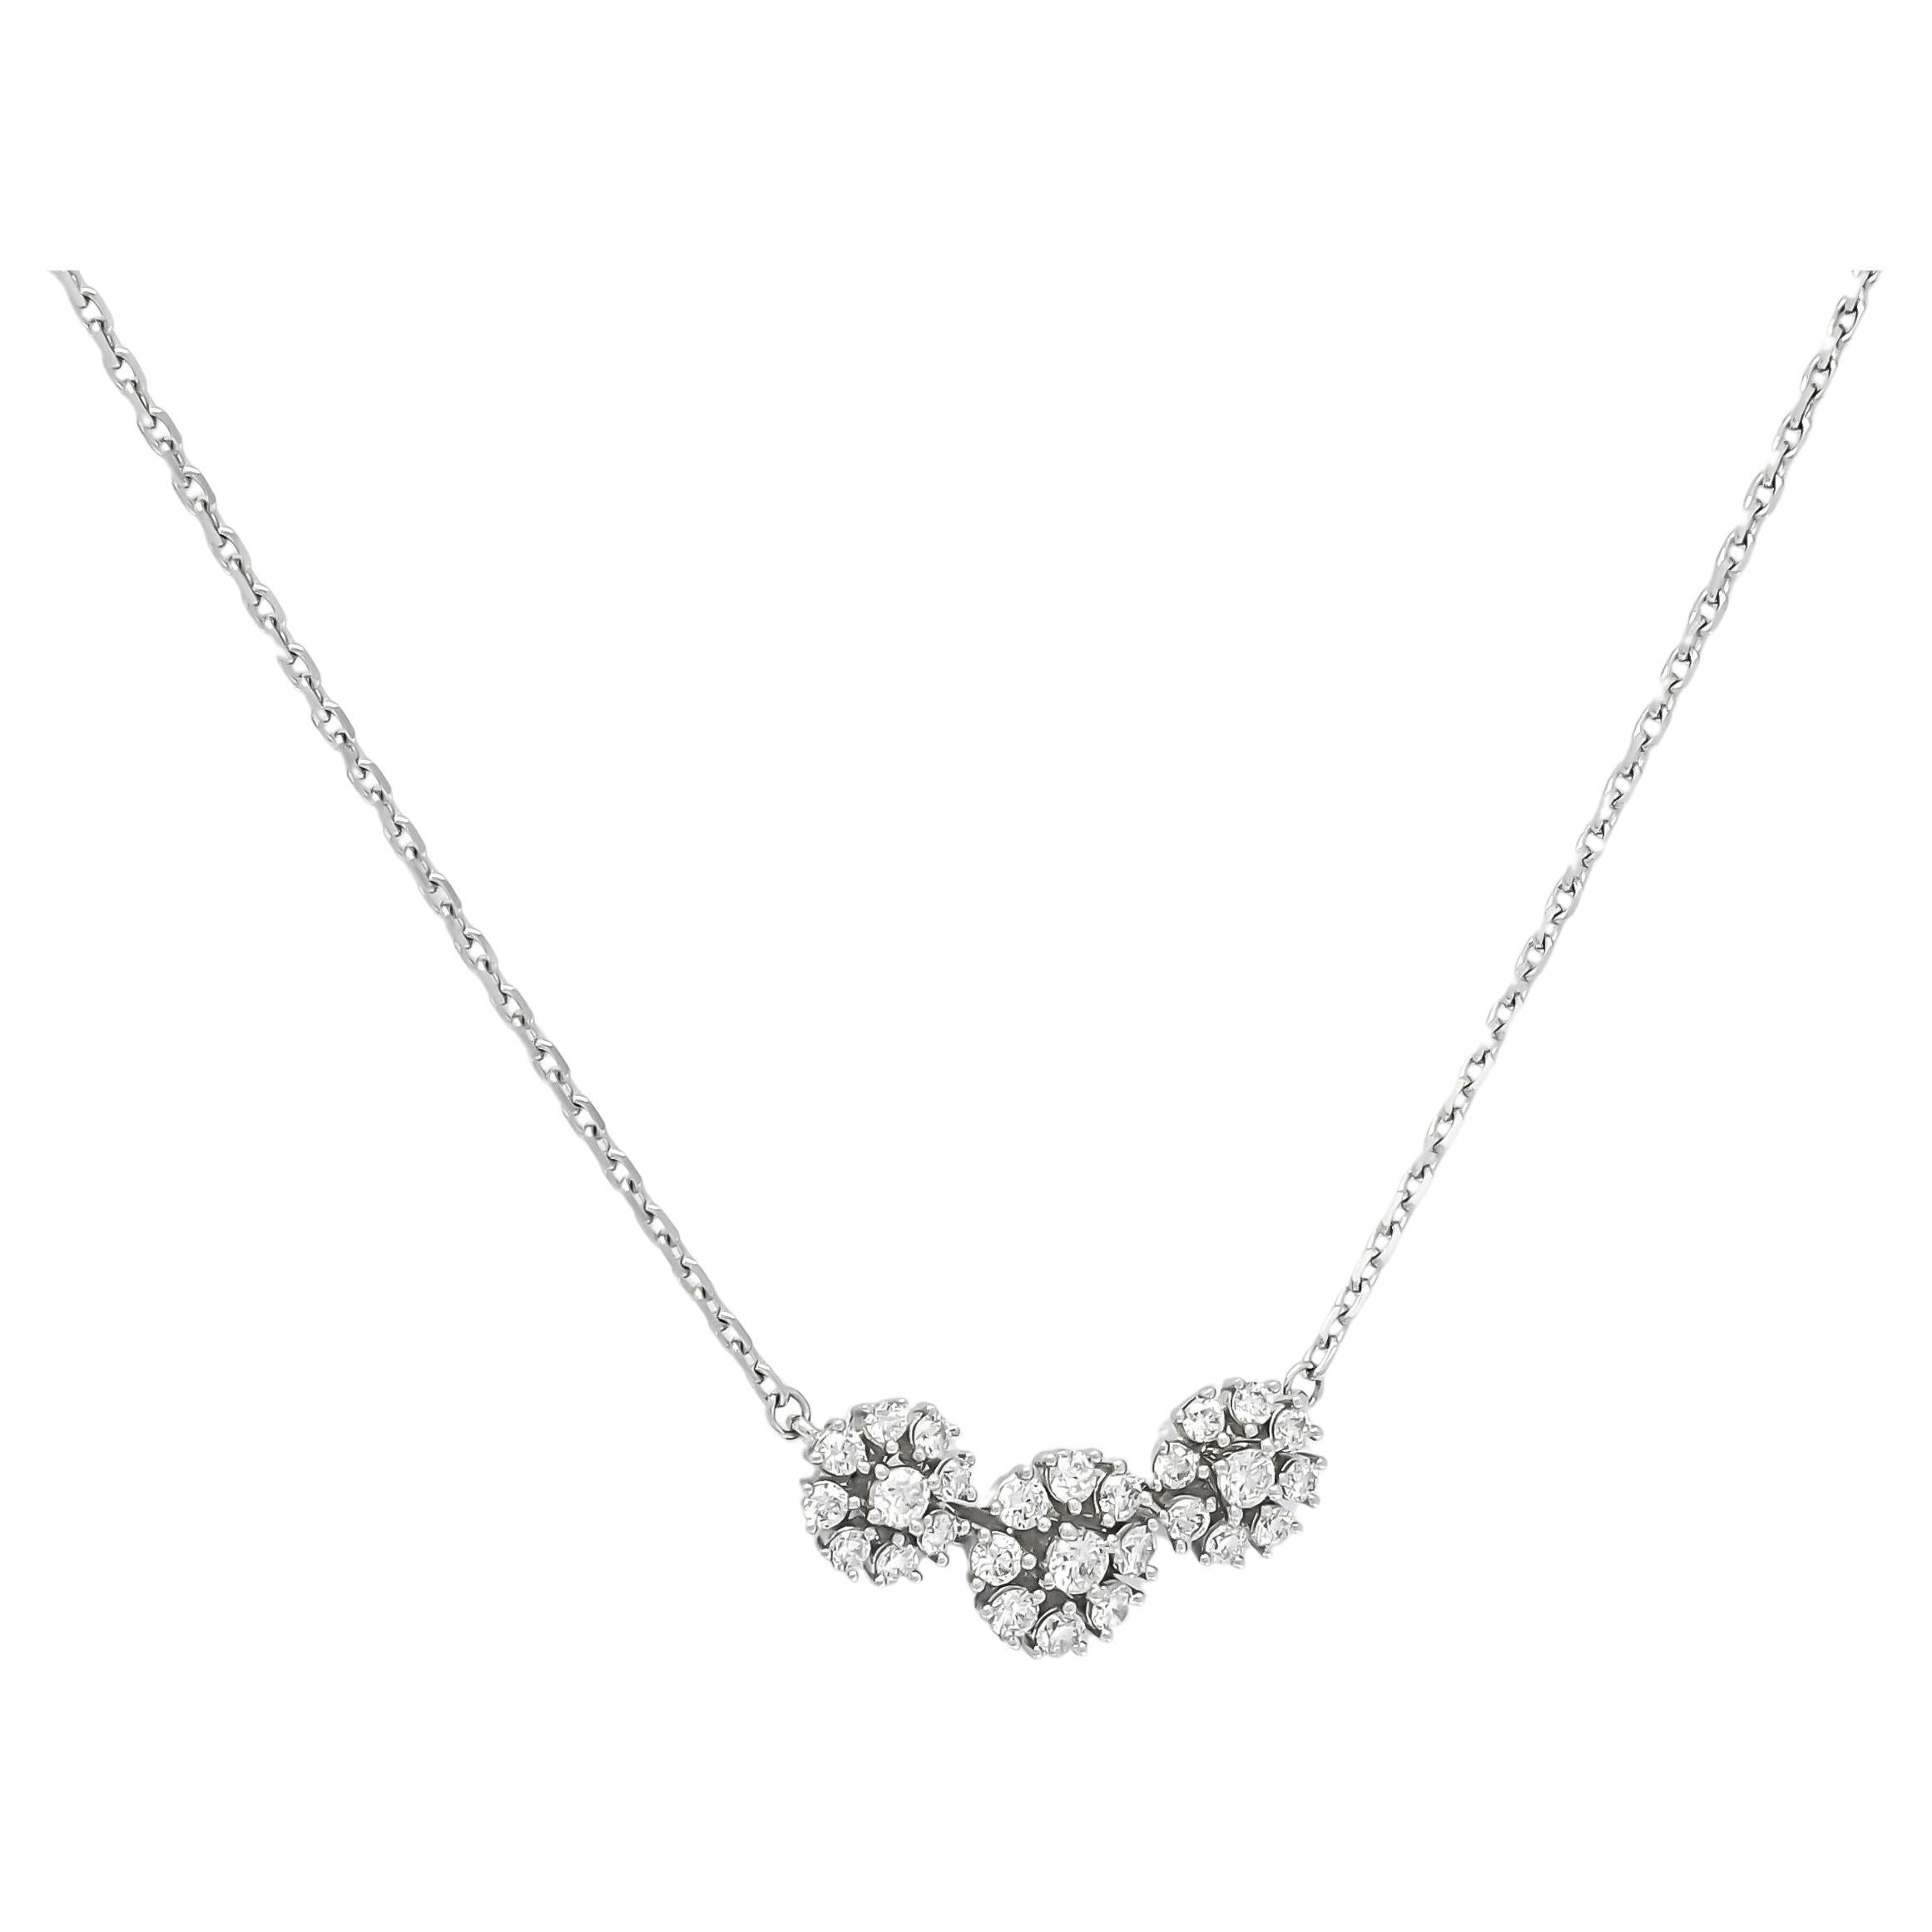 Embrace the enchanting elegance of this pendant, crafted in 18KT white gold and adorned with three dazzling clusters of natural diamonds. Carefully arranged to create a mesmerizing focal point, these clusters radiate sophistication and grace.

Each